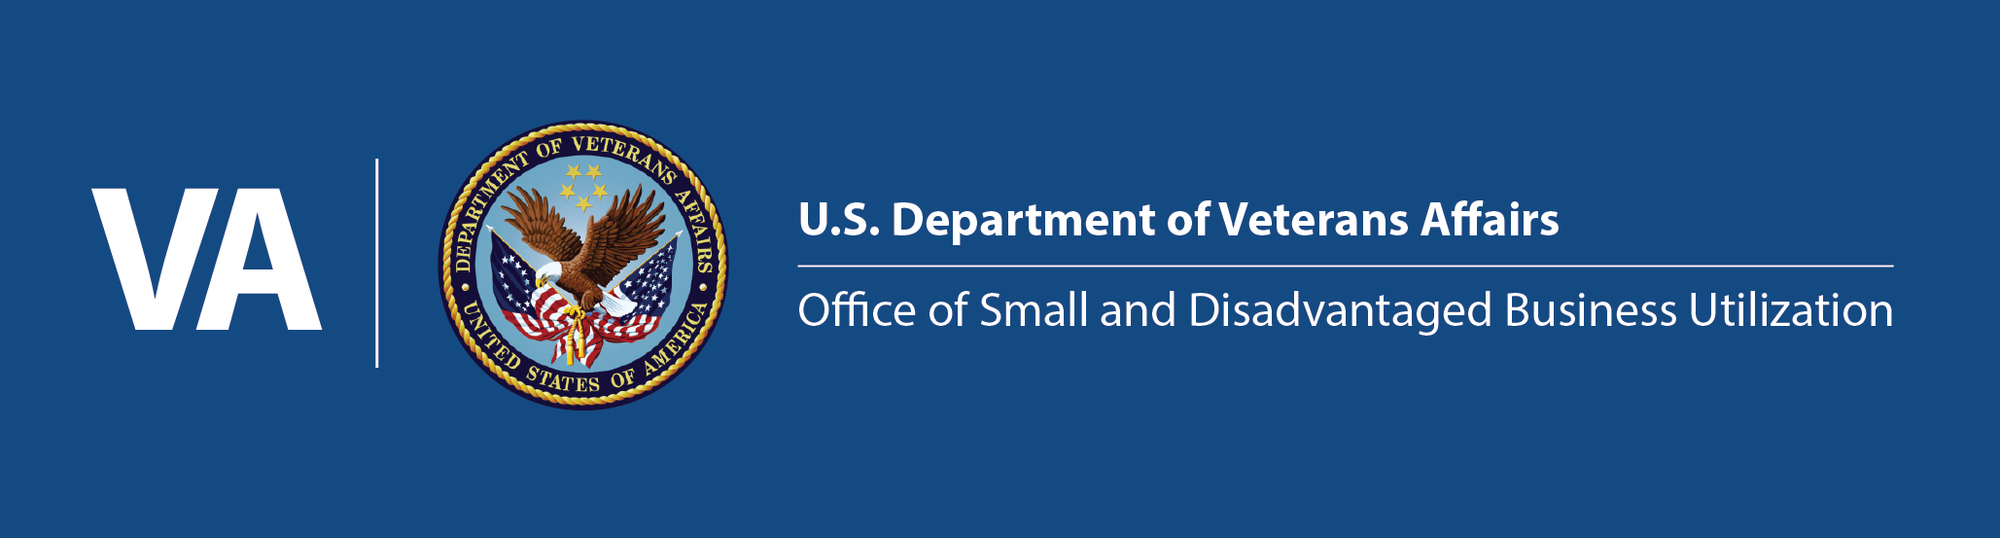 Veterans Affairs Office of Small and Disadvantaged Business Utilization Logo